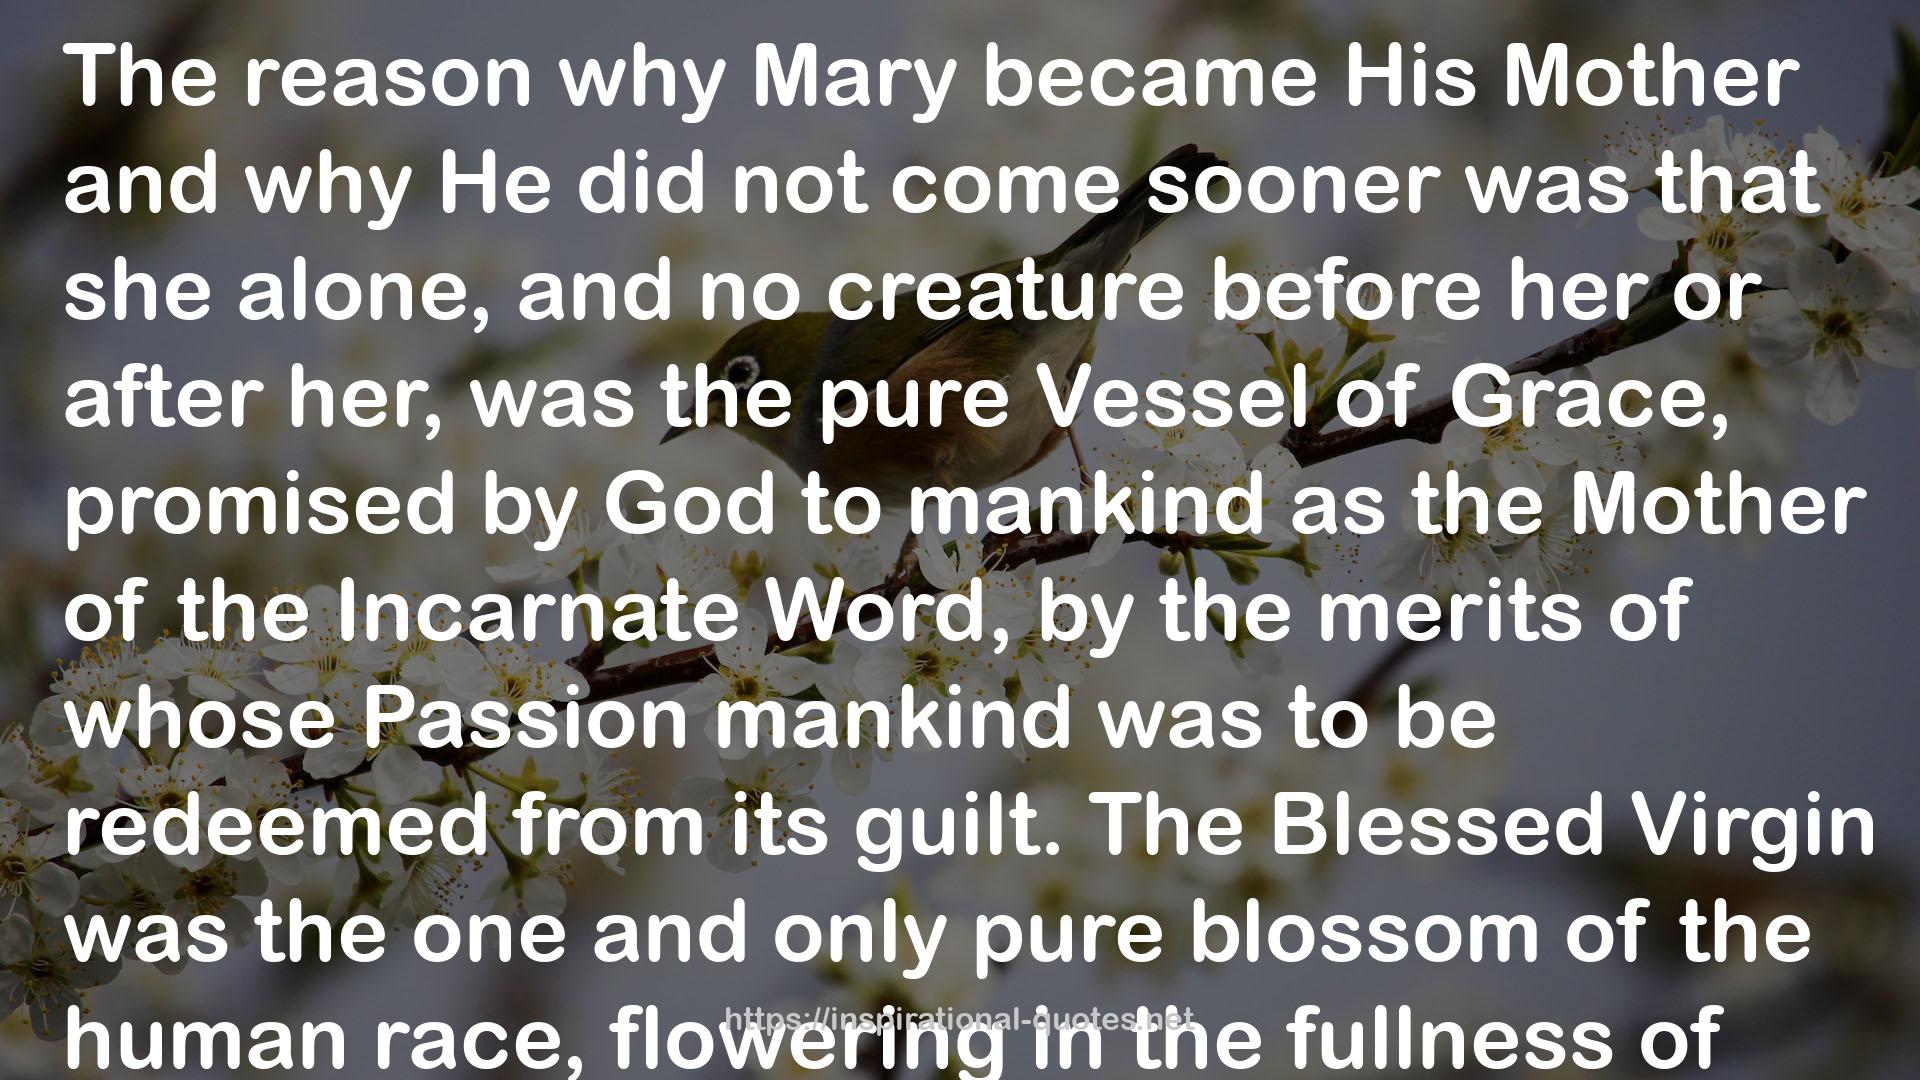 The Life of the Blessed Virgin Mary: From the Visions of Ven. Anne Catherine Emmerich QUOTES